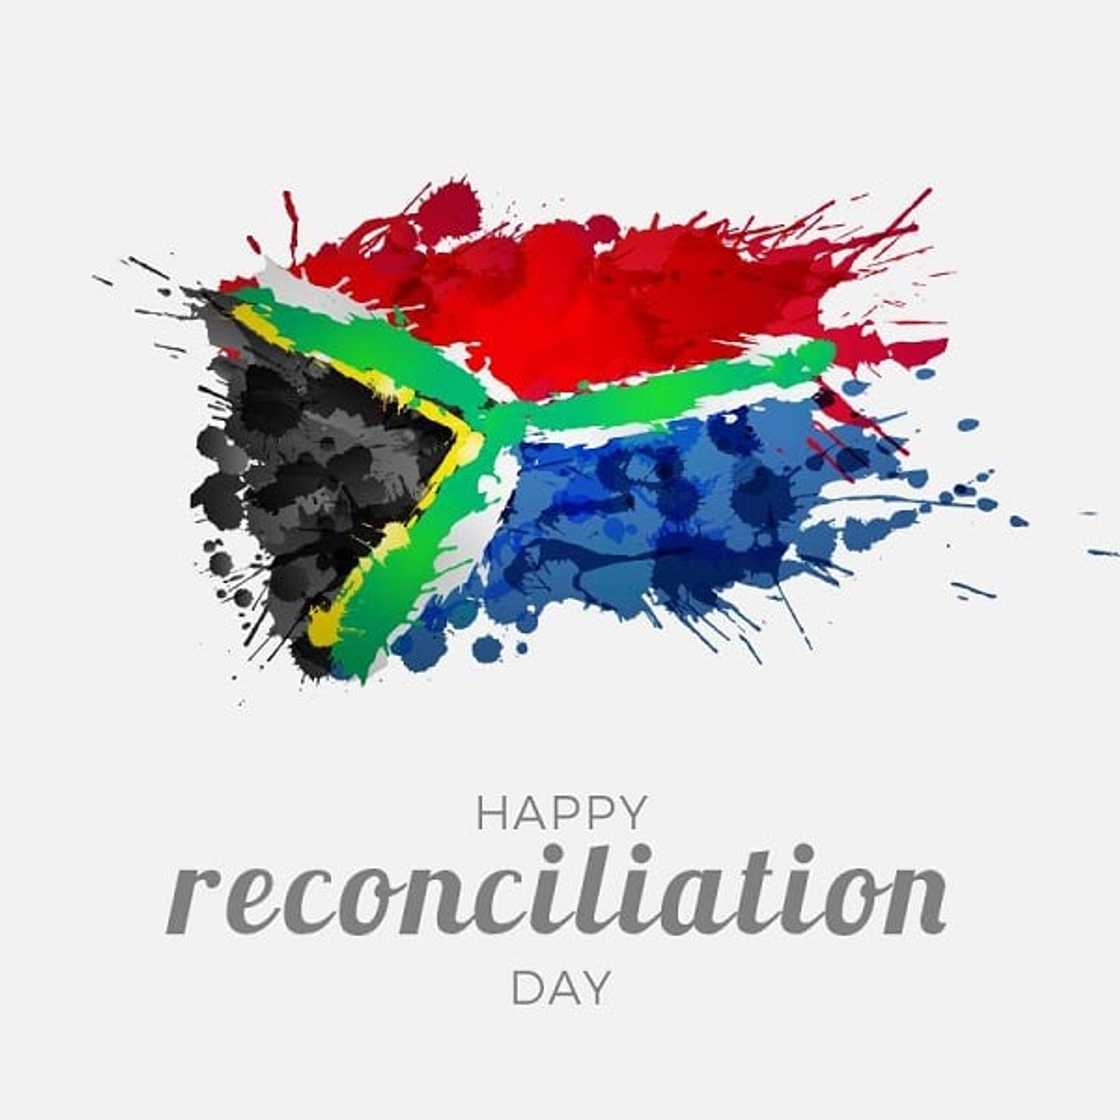 16 December day of reconciliation pictures